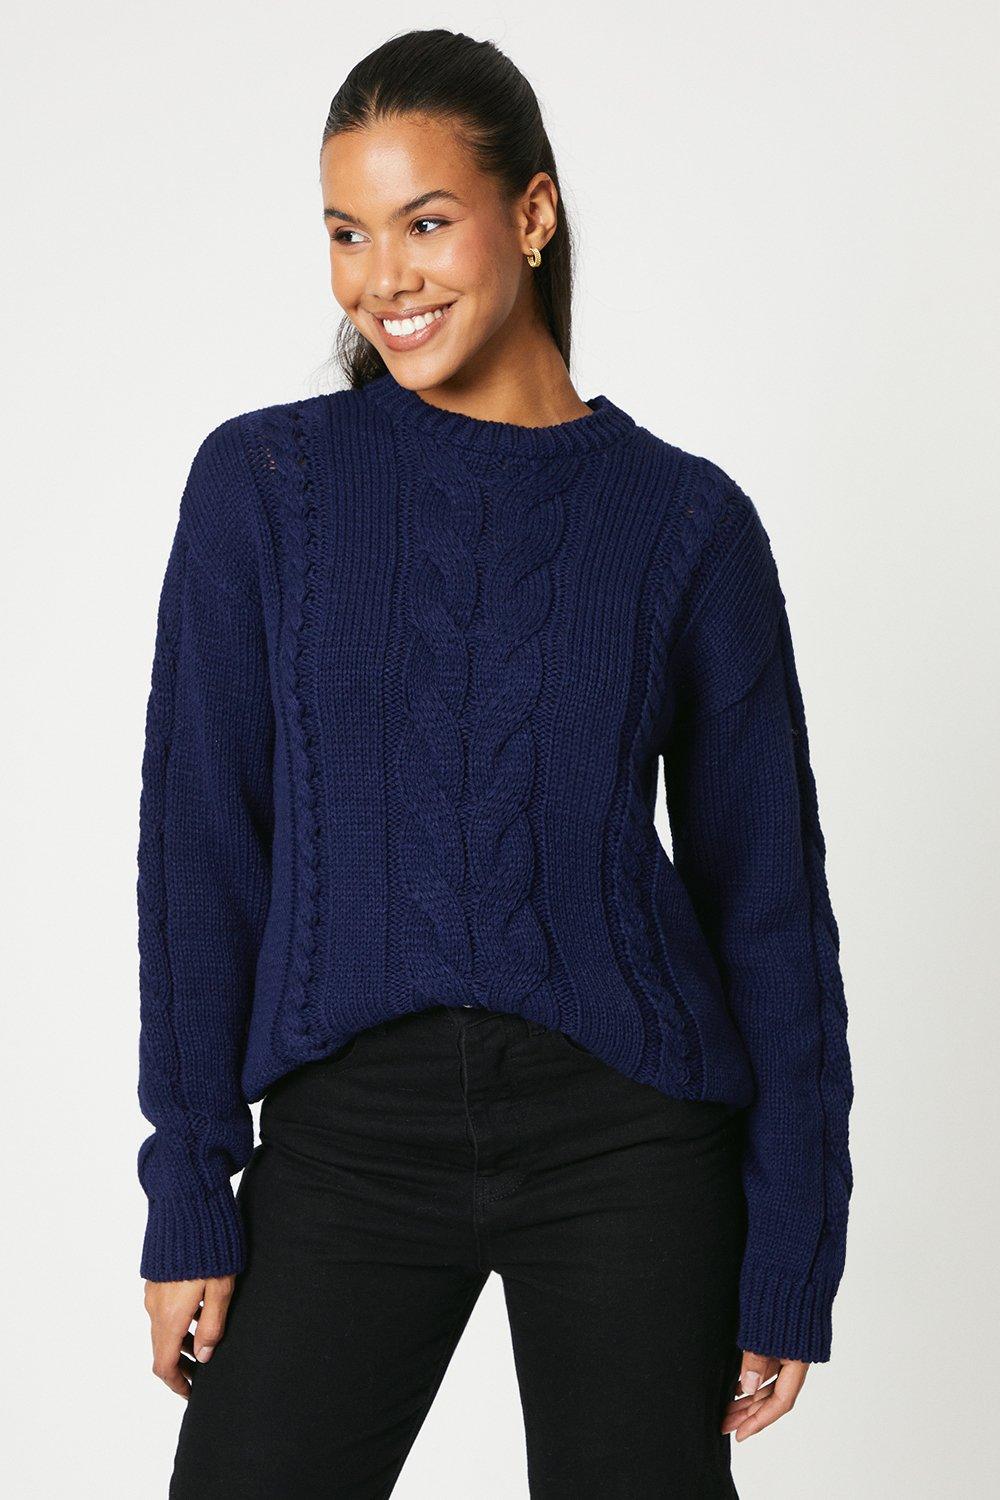 Women's Tall Cable Knitted Jumper - navy - L